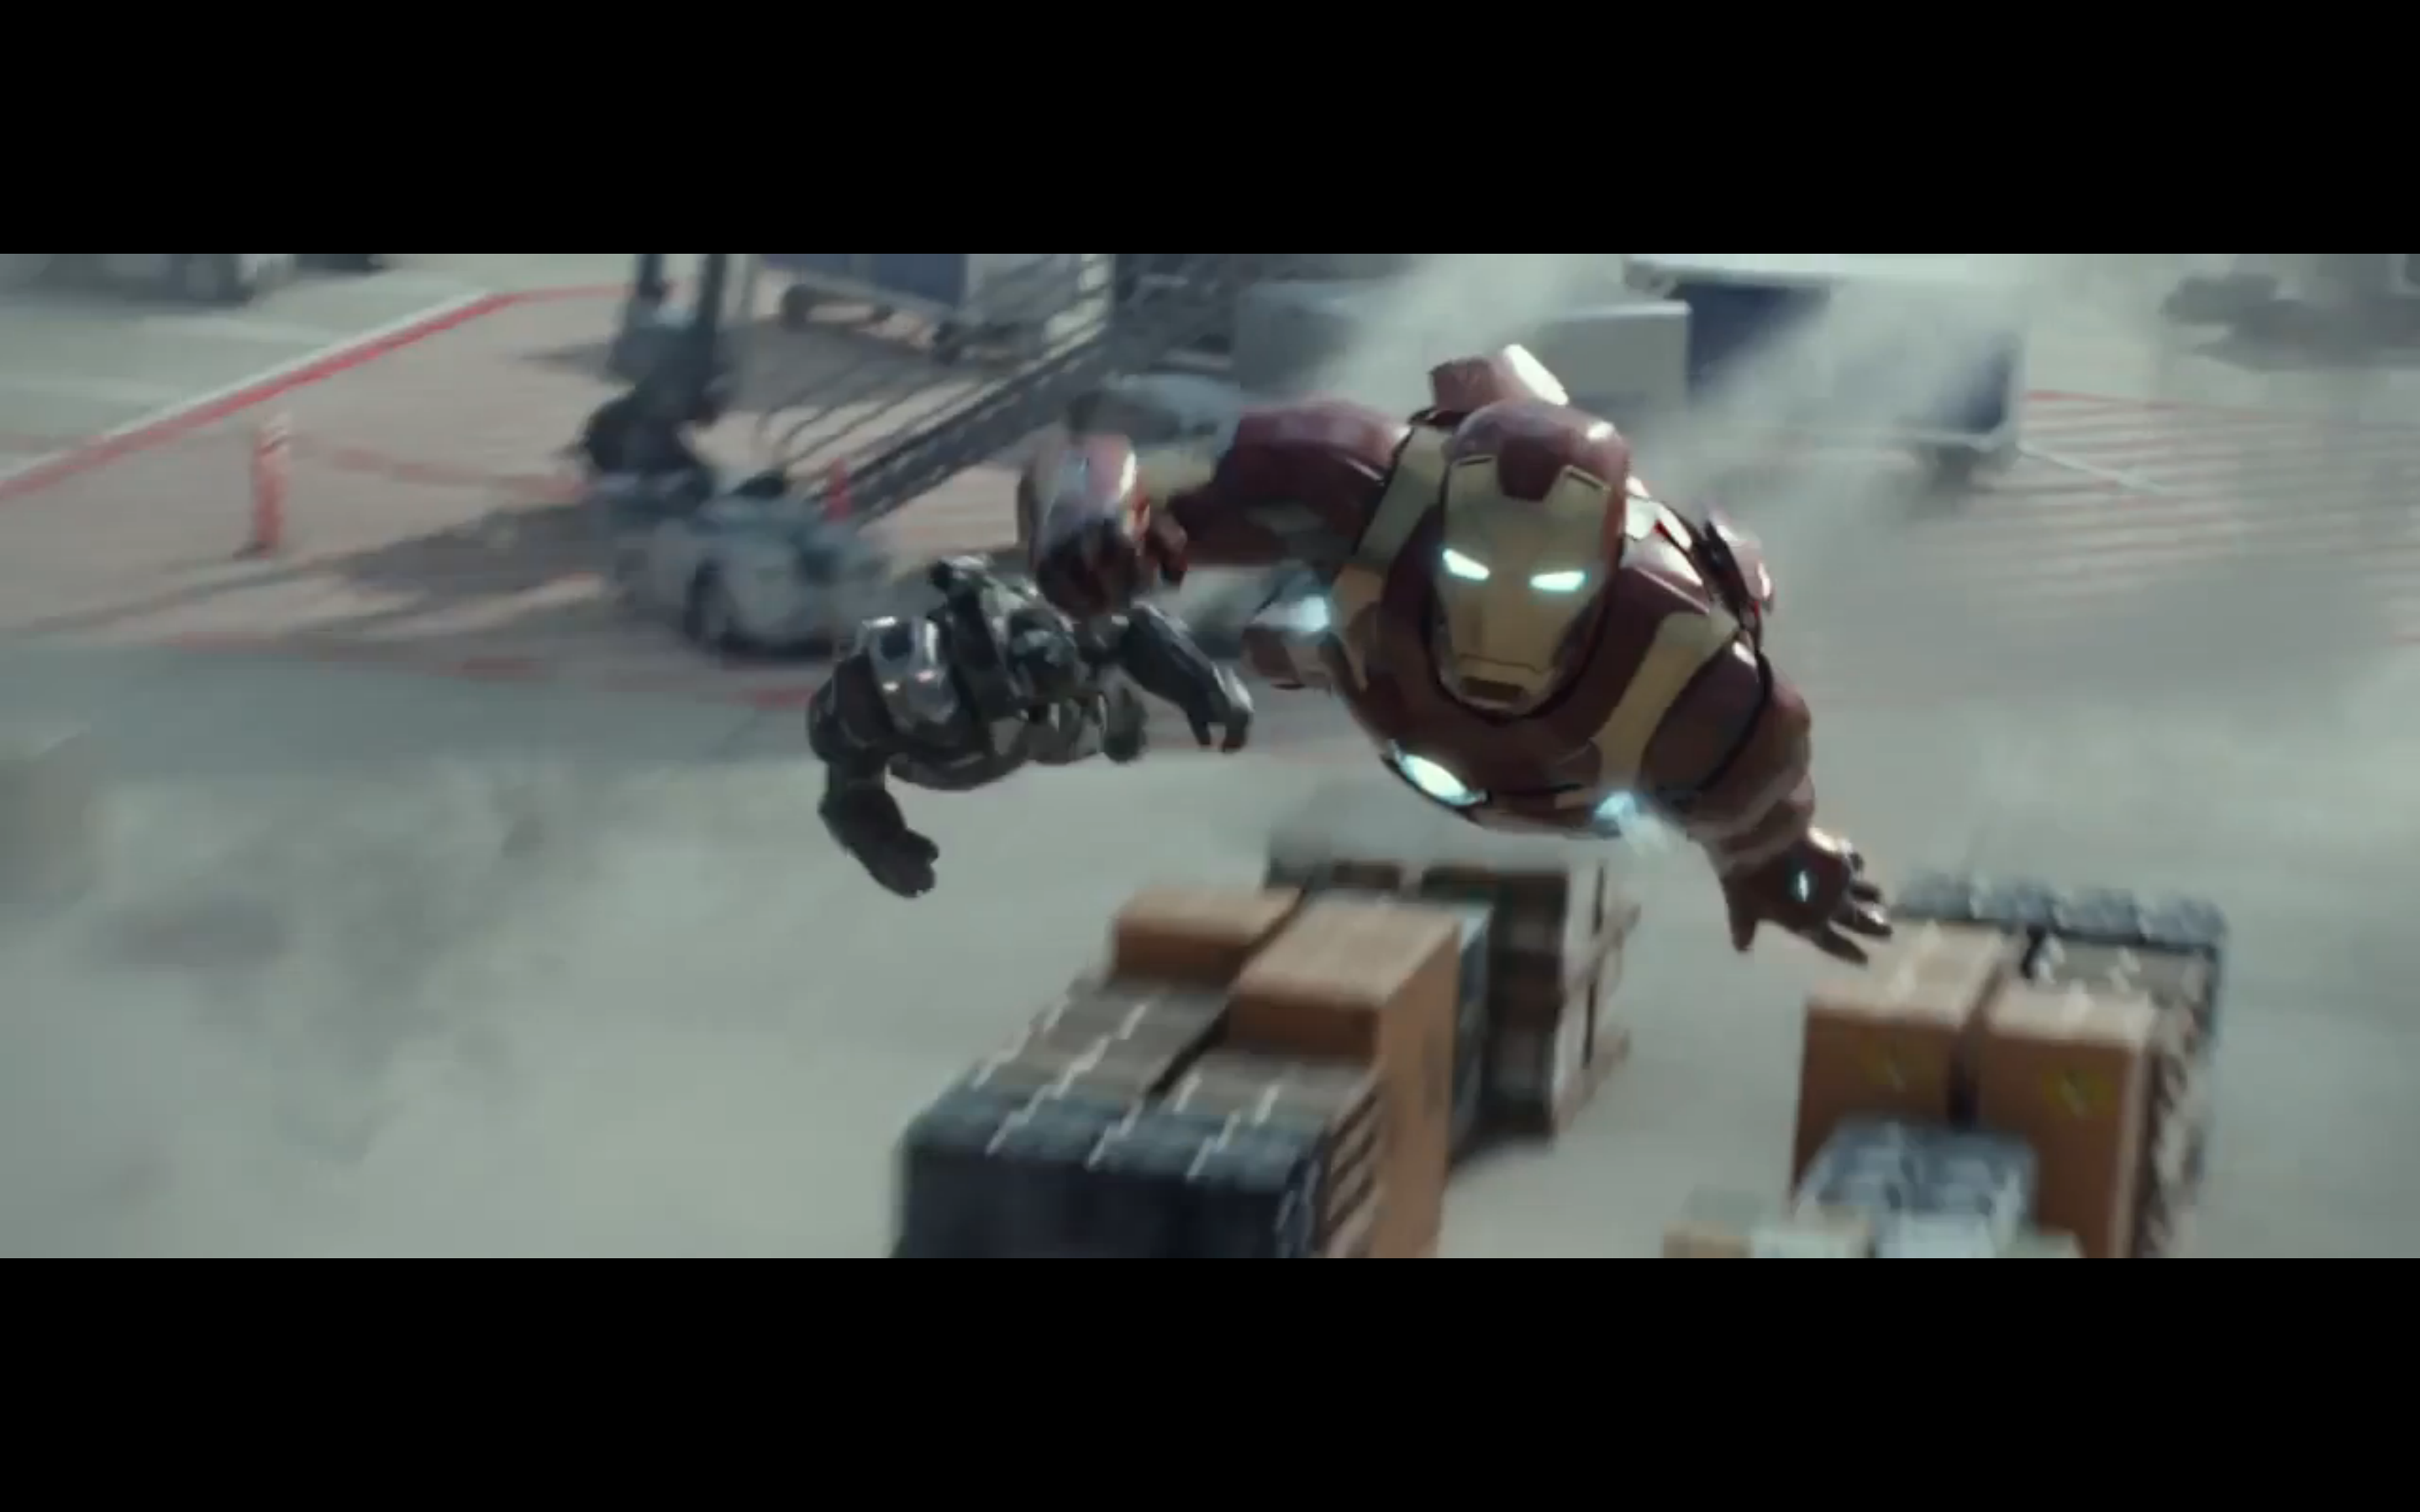 Breaking Down The Captain America: Civil War Trailer - Page 12 of 17 ...